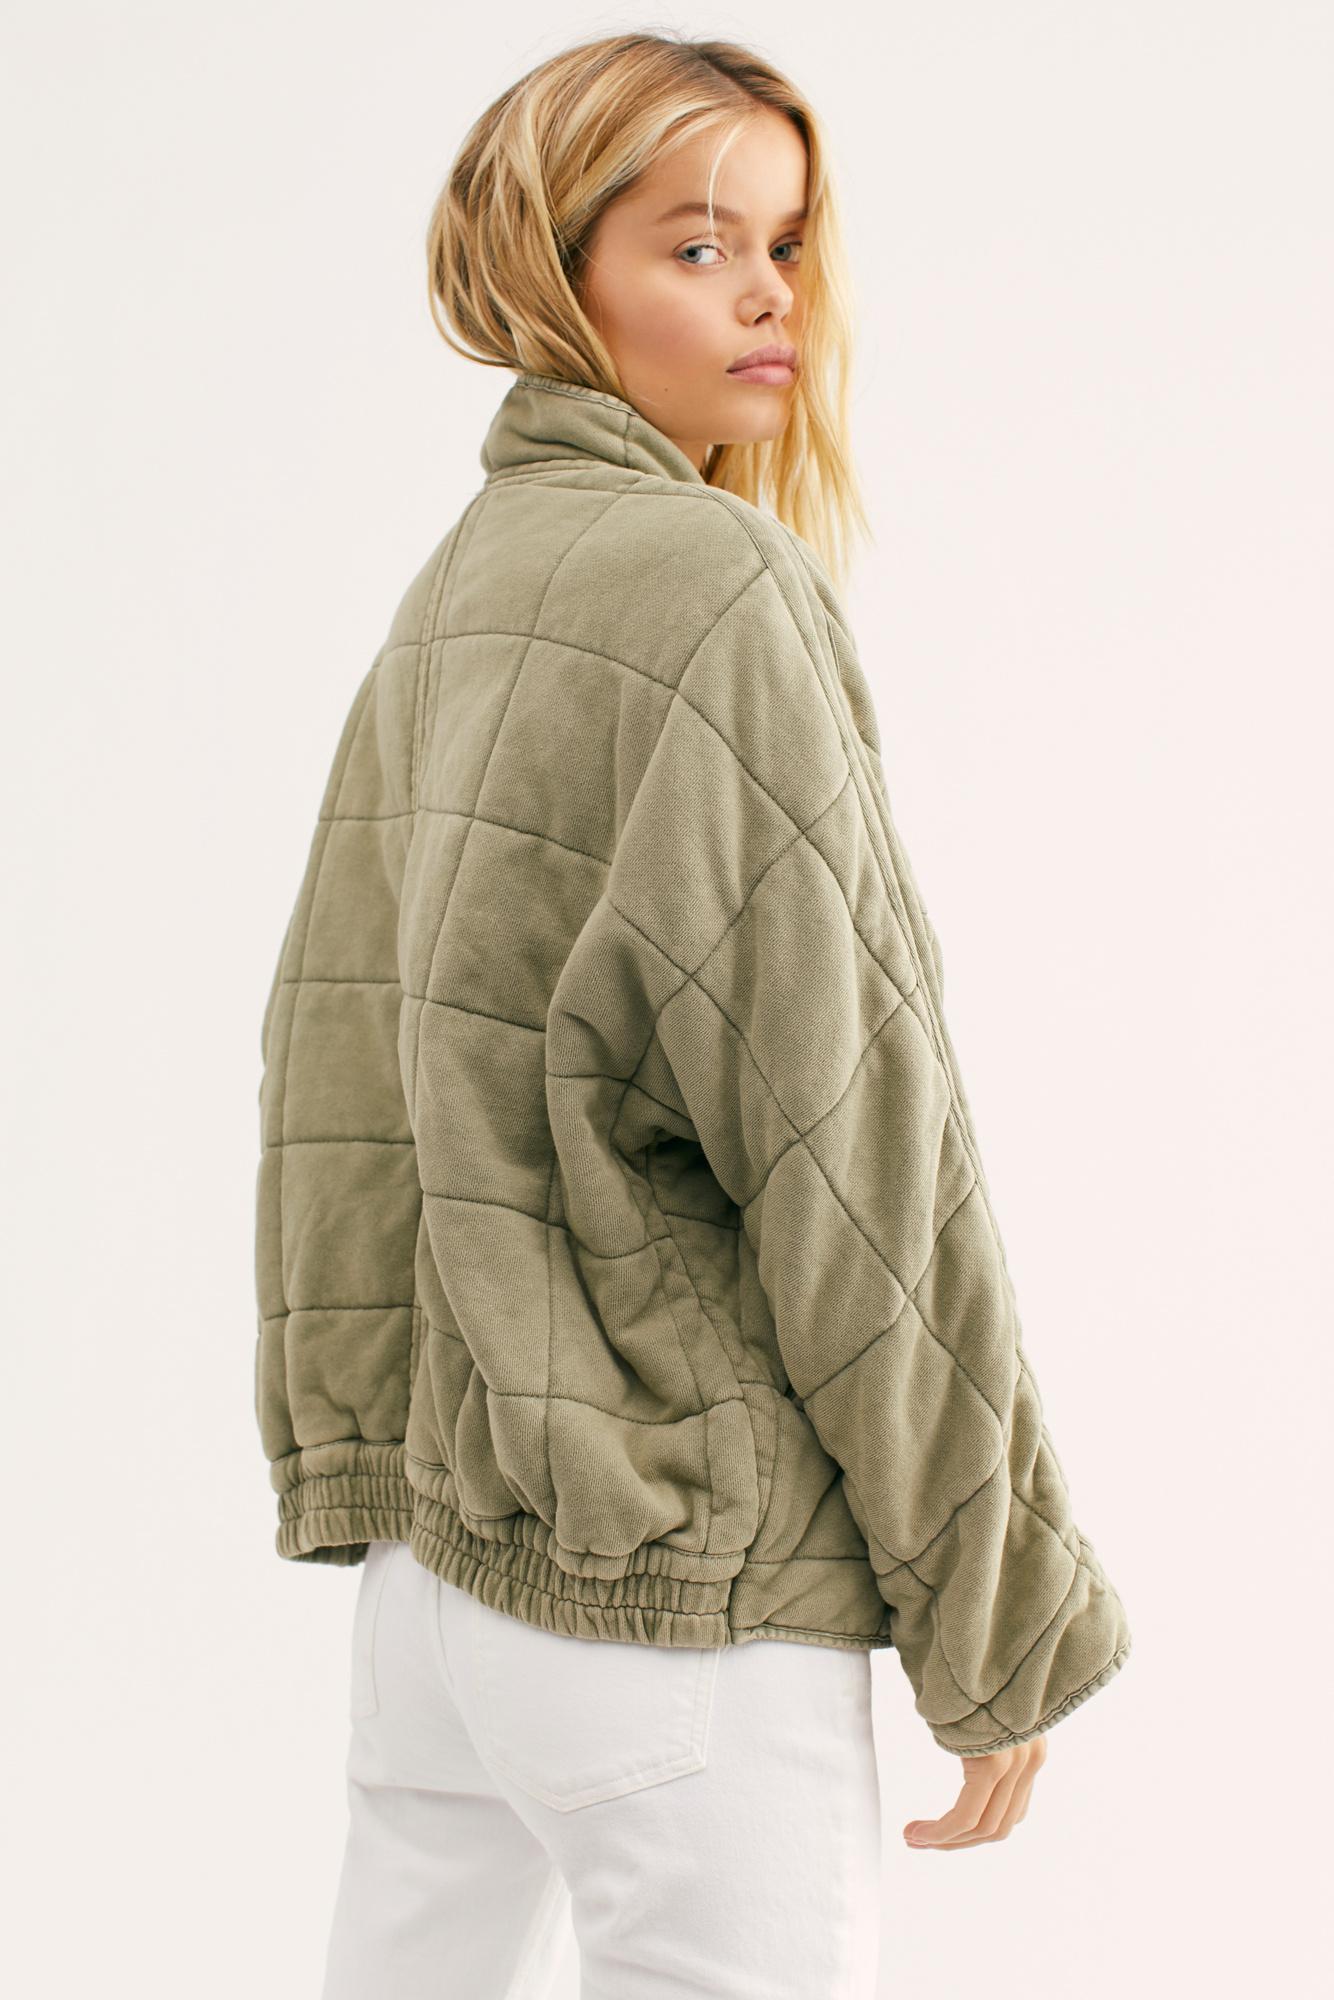 Lyst - Free People Dolman Quilted Knit Jacket in Green